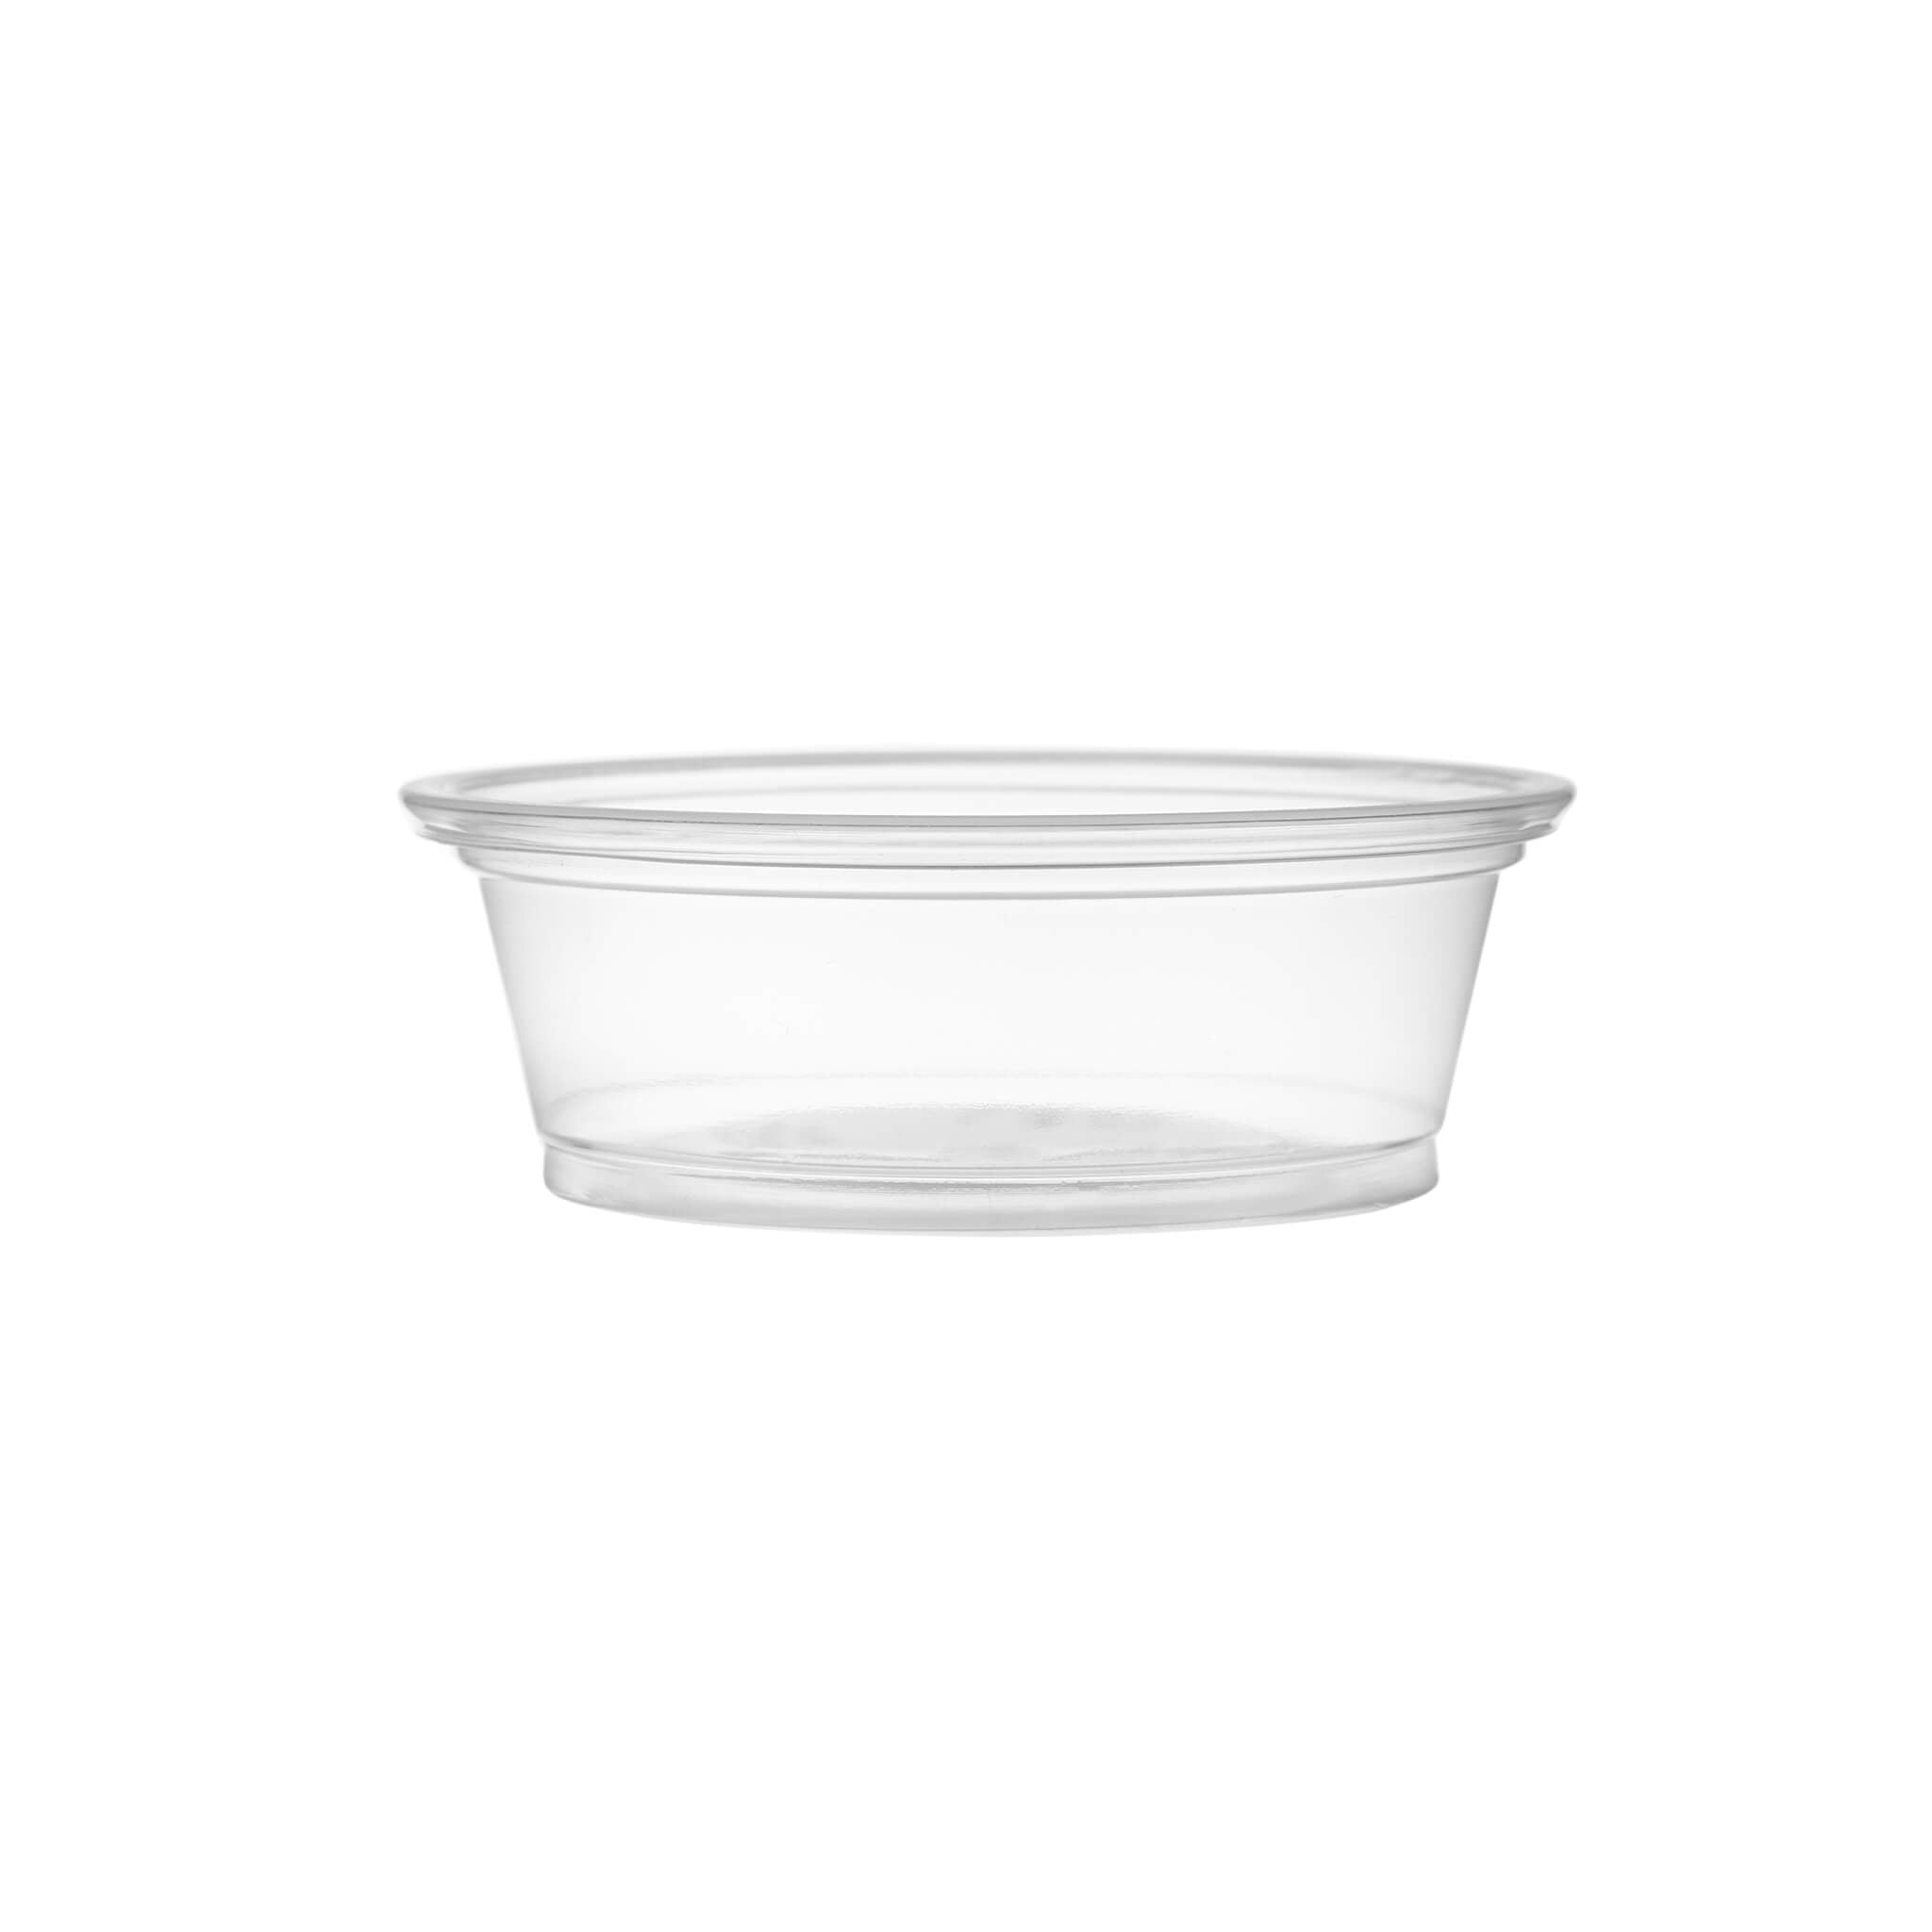 1.5 Oz clear portion cup for condiments and sauces - Hotpack Global